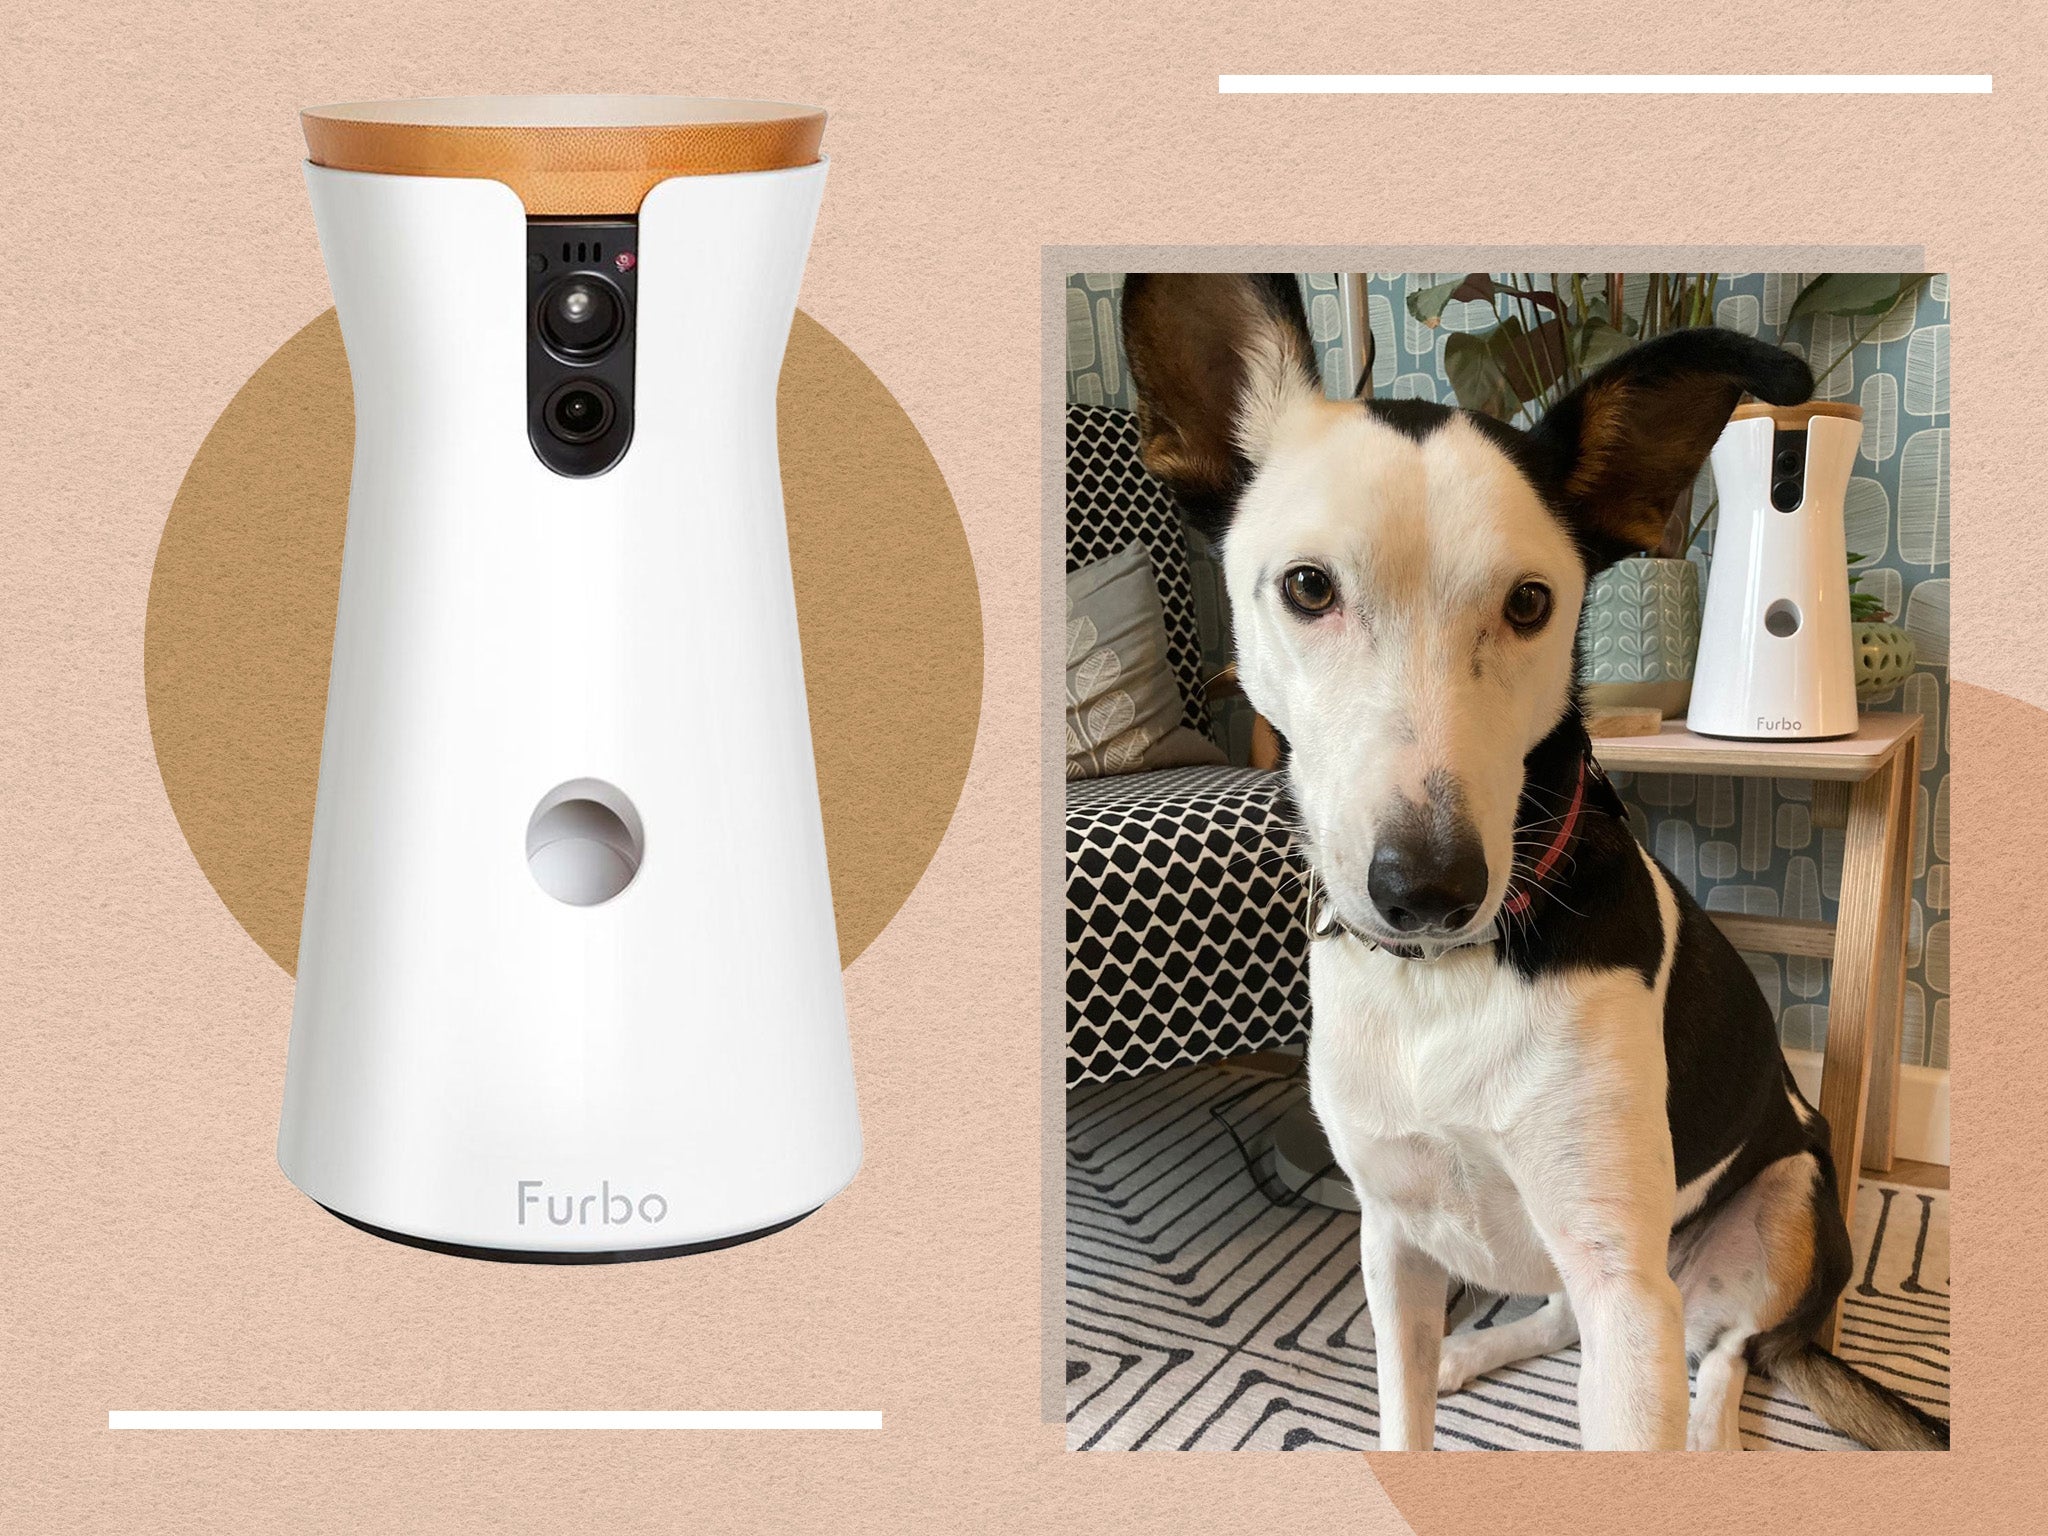 The camera has two-way audio and a treat dispenser